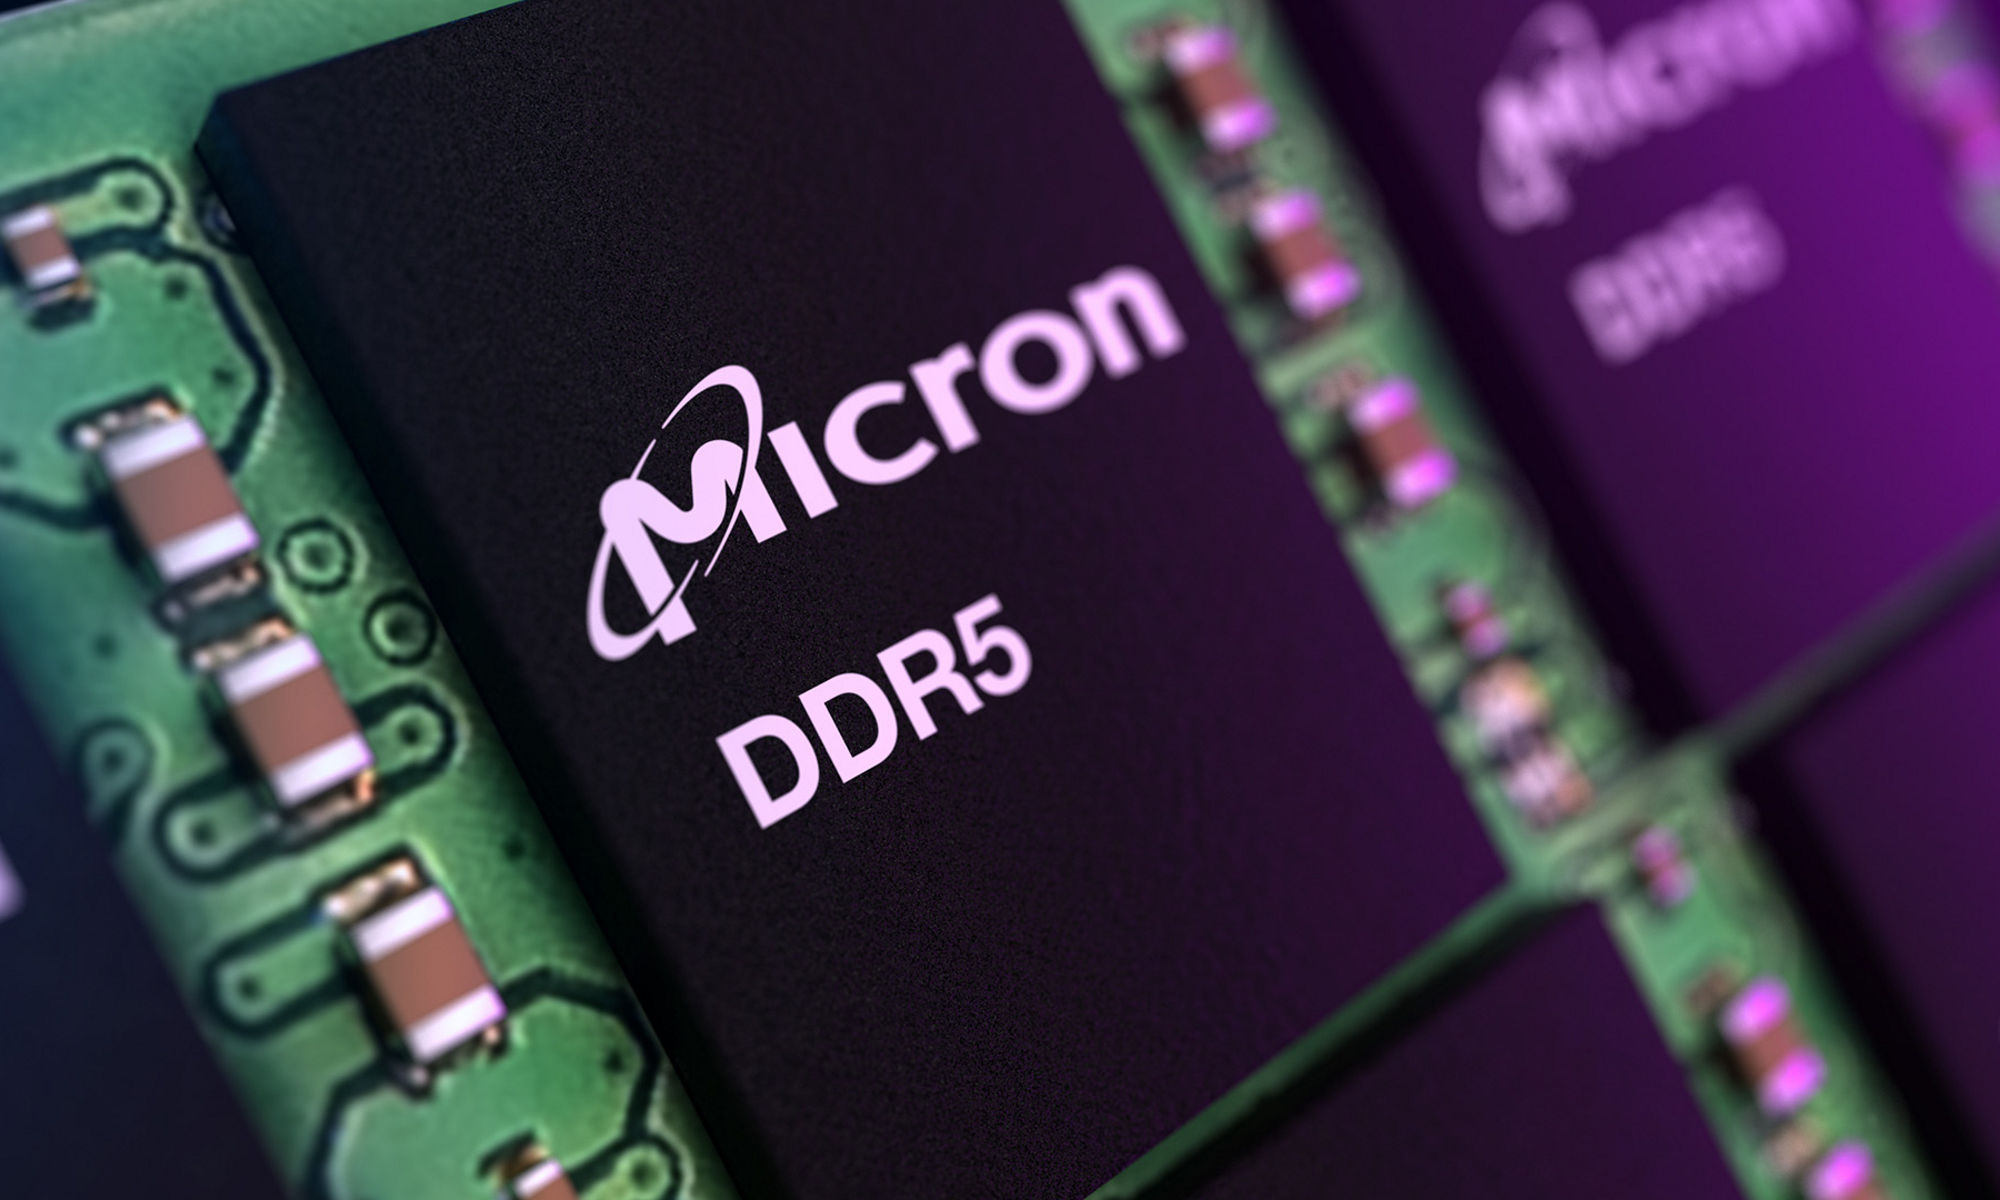 Micron DDR5 components